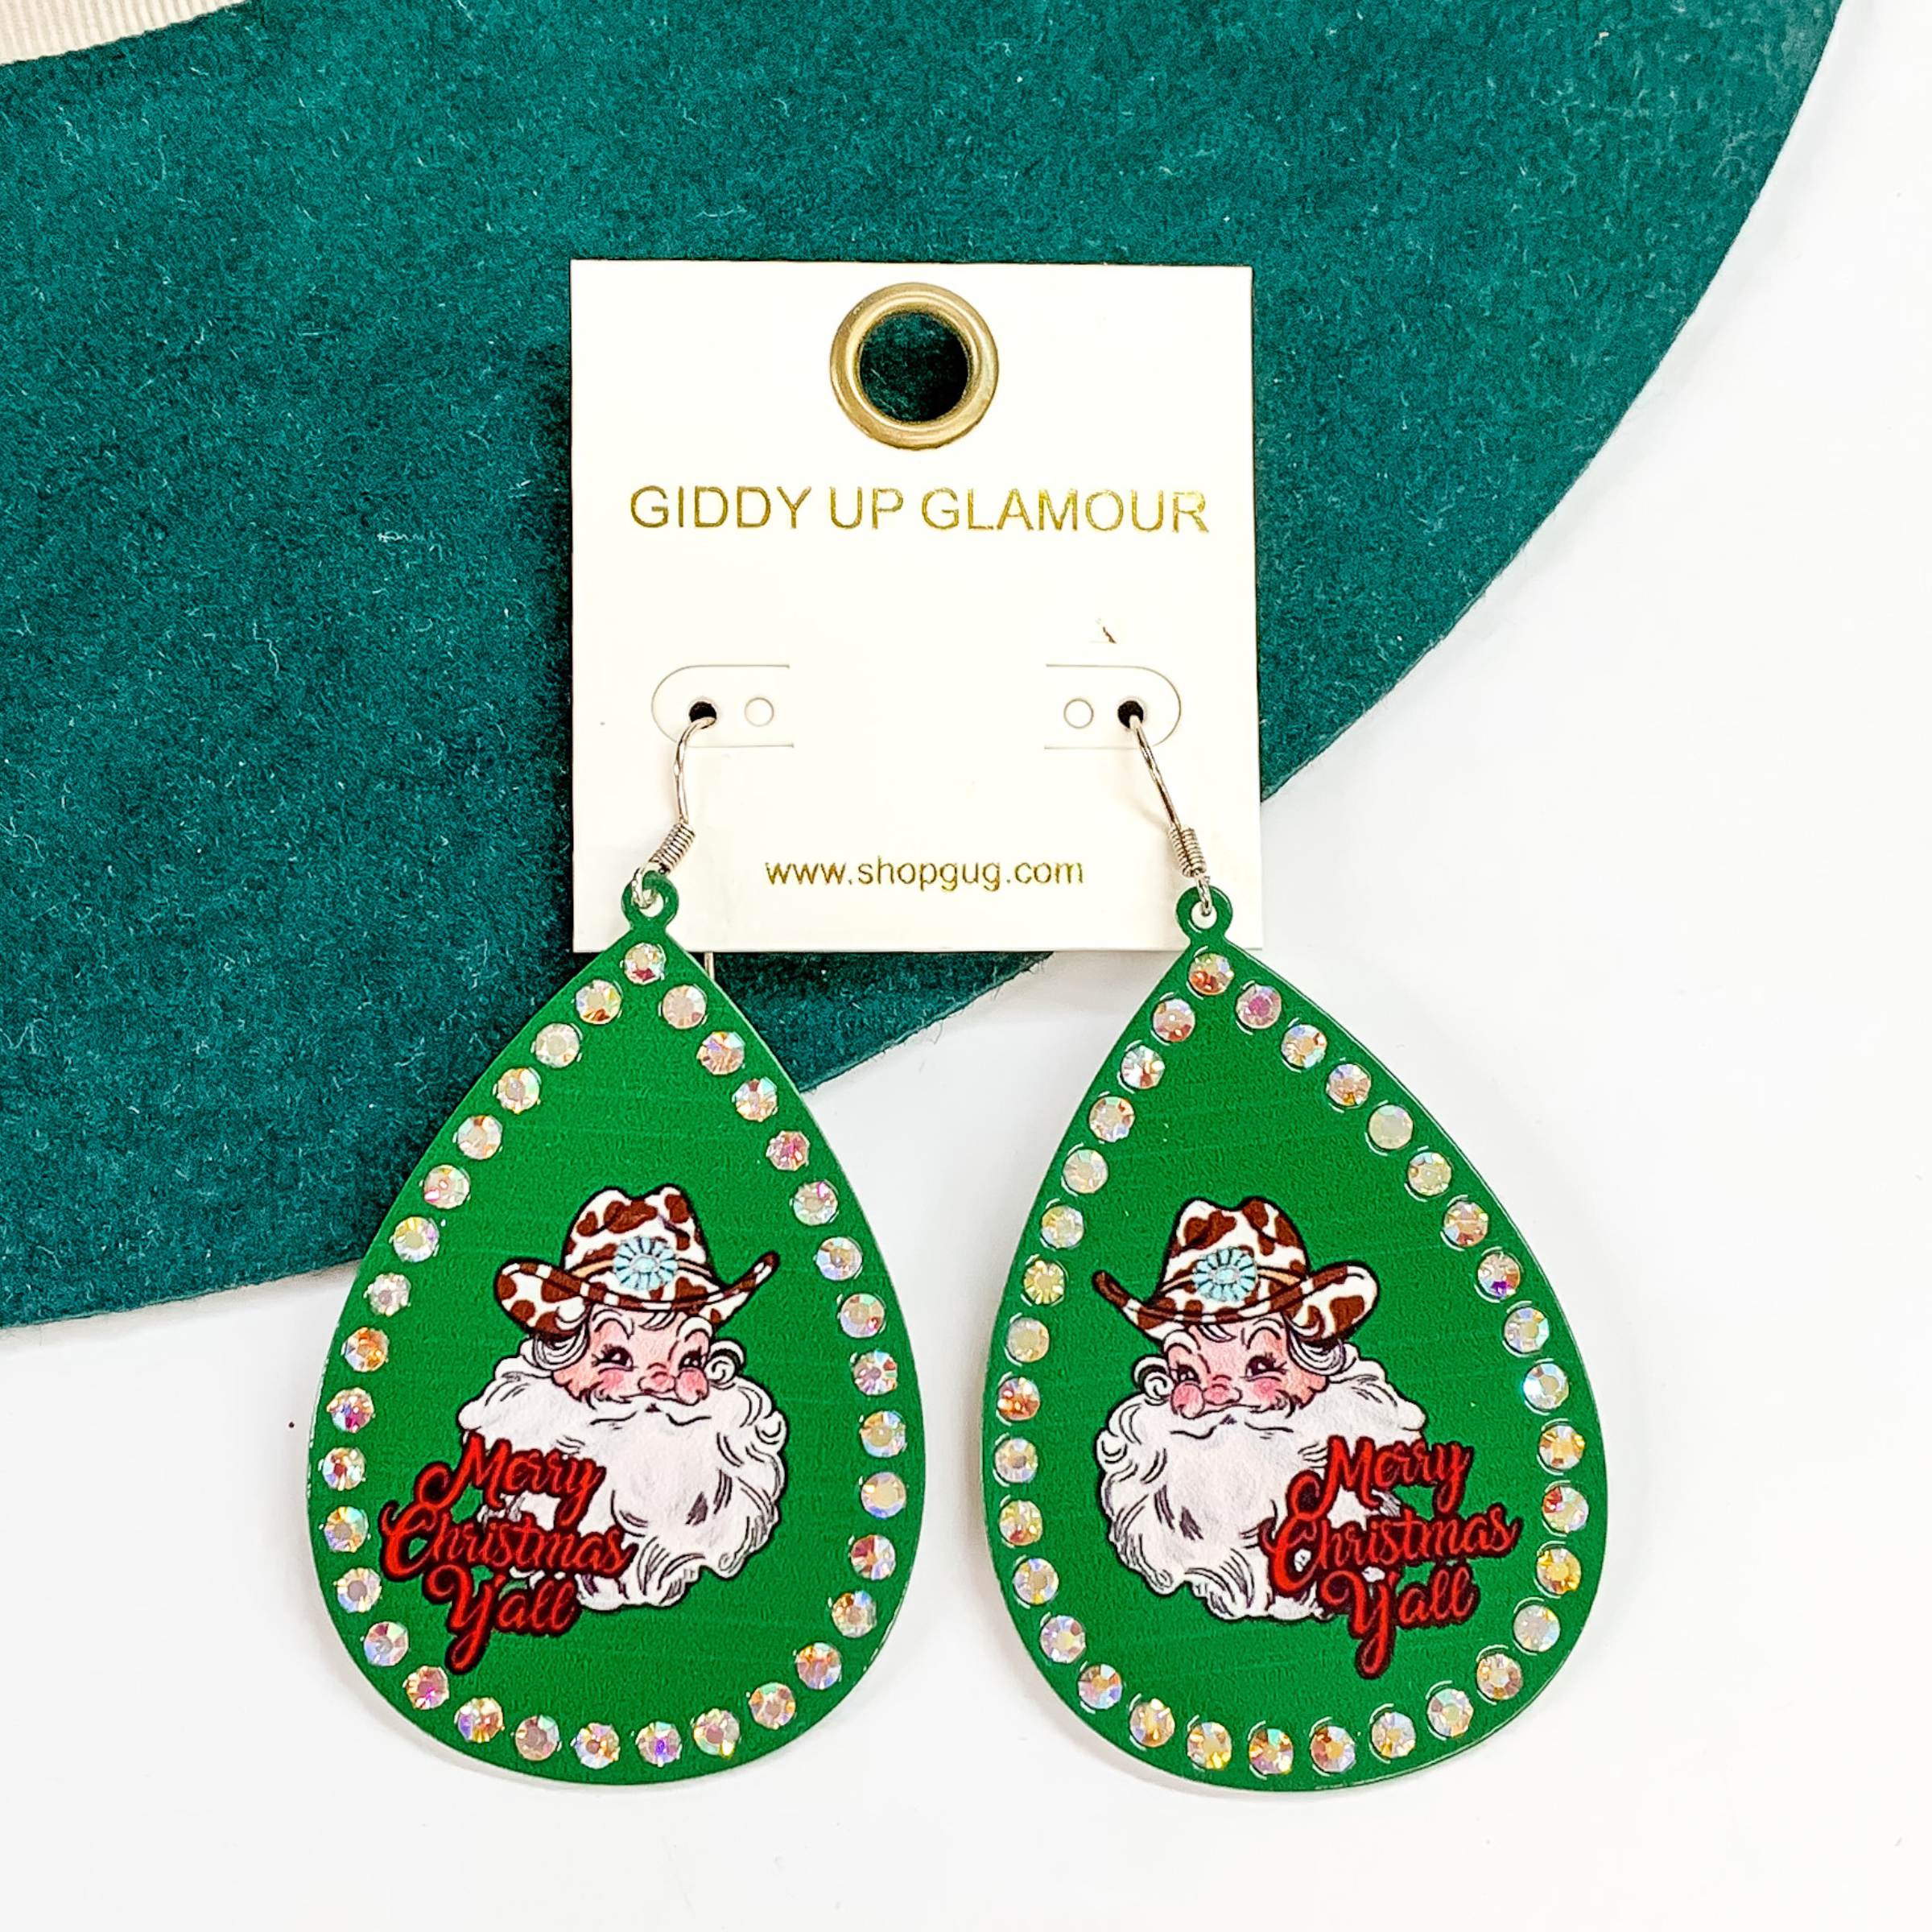 Teardrop dangle earrings with a green design with an AB crystal outline. These earrings also include a printed Santa in the middle with a white and brown cow print hat that has a concho belt. The words "Merry Christmas Y'all" is under the Santa head. These earrings are pictured partially laying on a green felt hat on a white background.